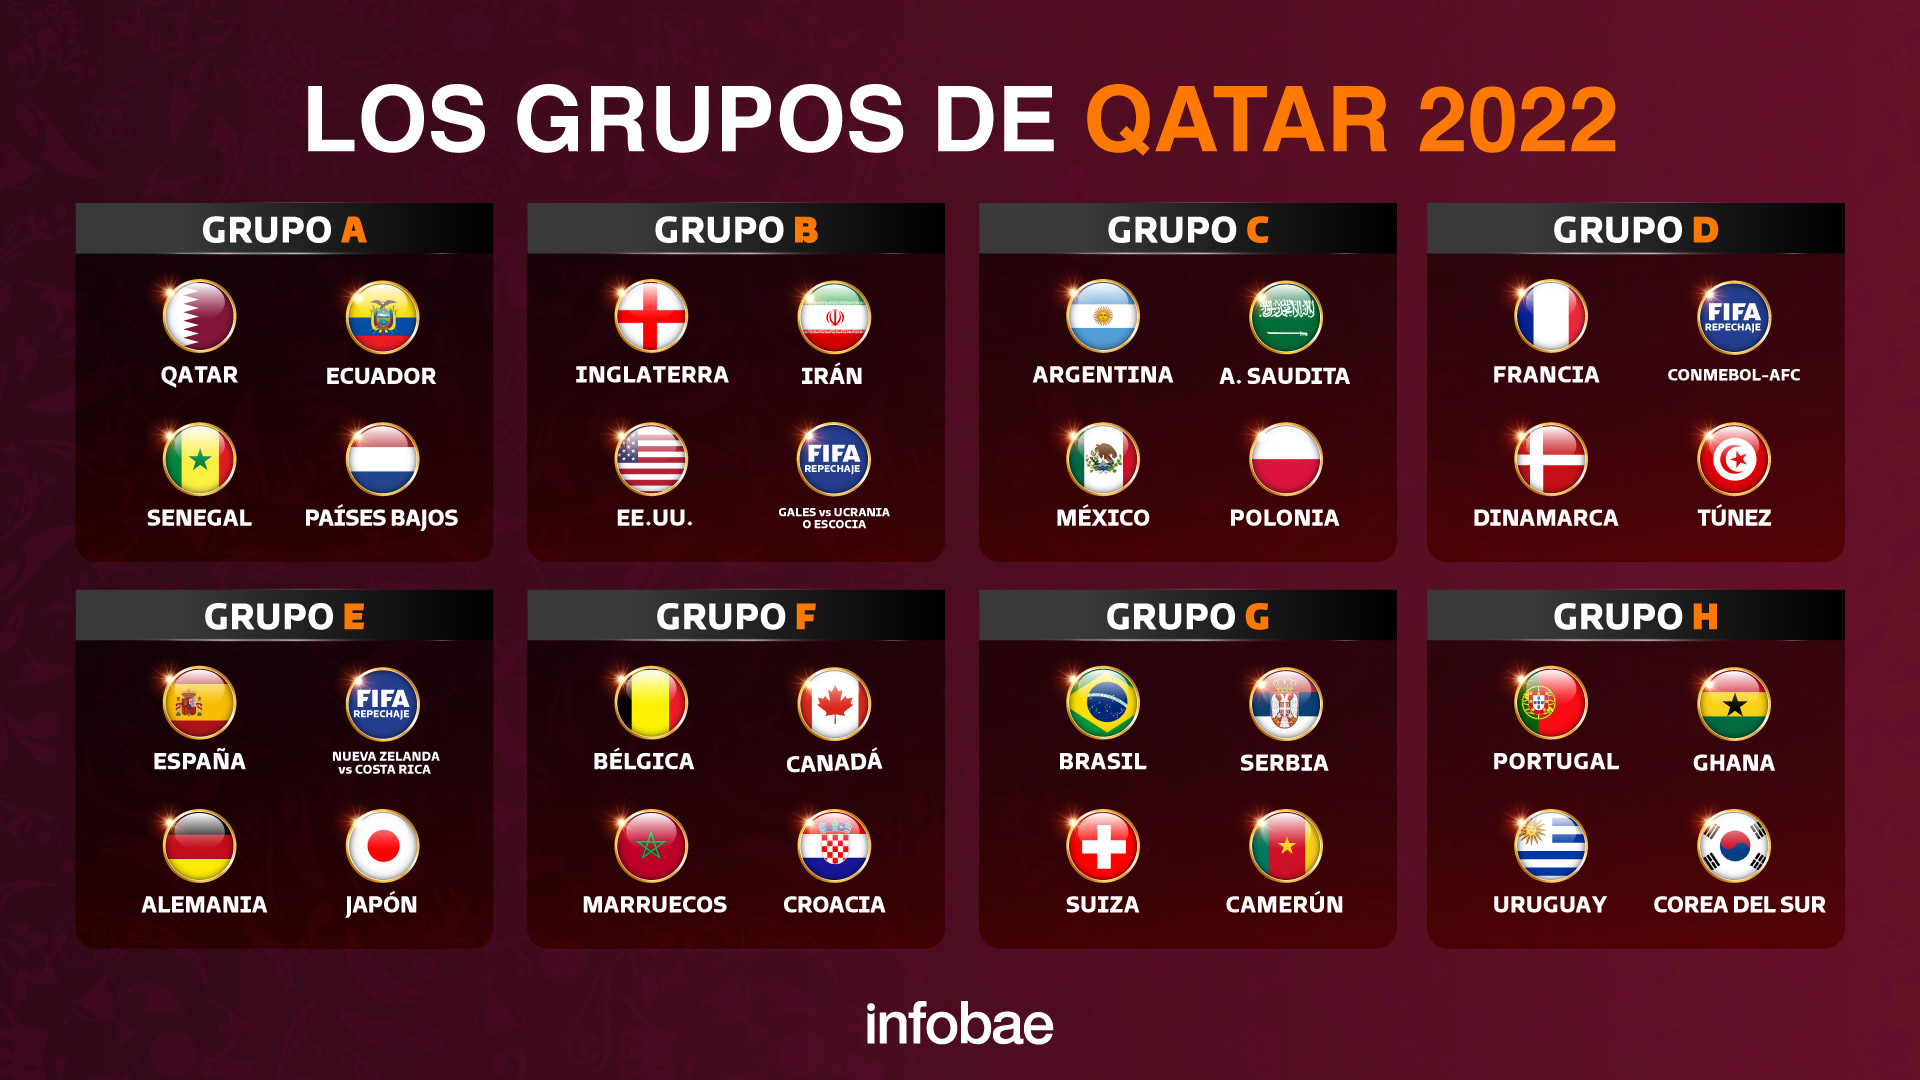 The complete fixture of the Qatar 2022 World Cup: days, times and stadiums of all World Cup matches